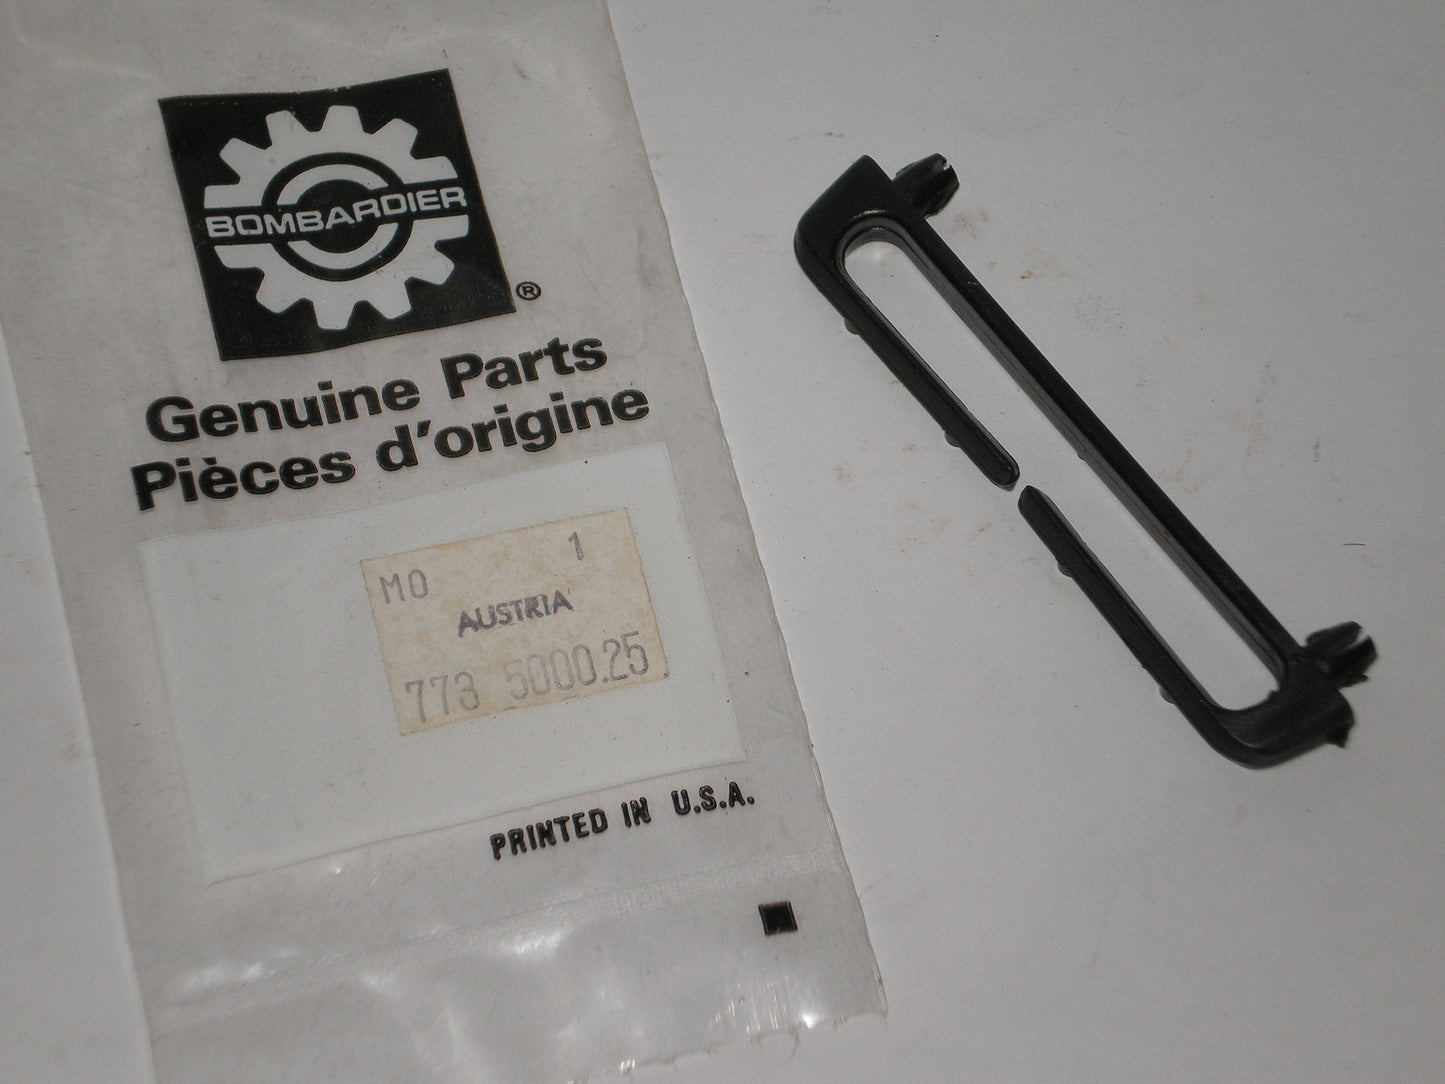 PUCH Magnum Maxi Sears Moped  Black Plastic Cable Holder Bracket 773-5000-25